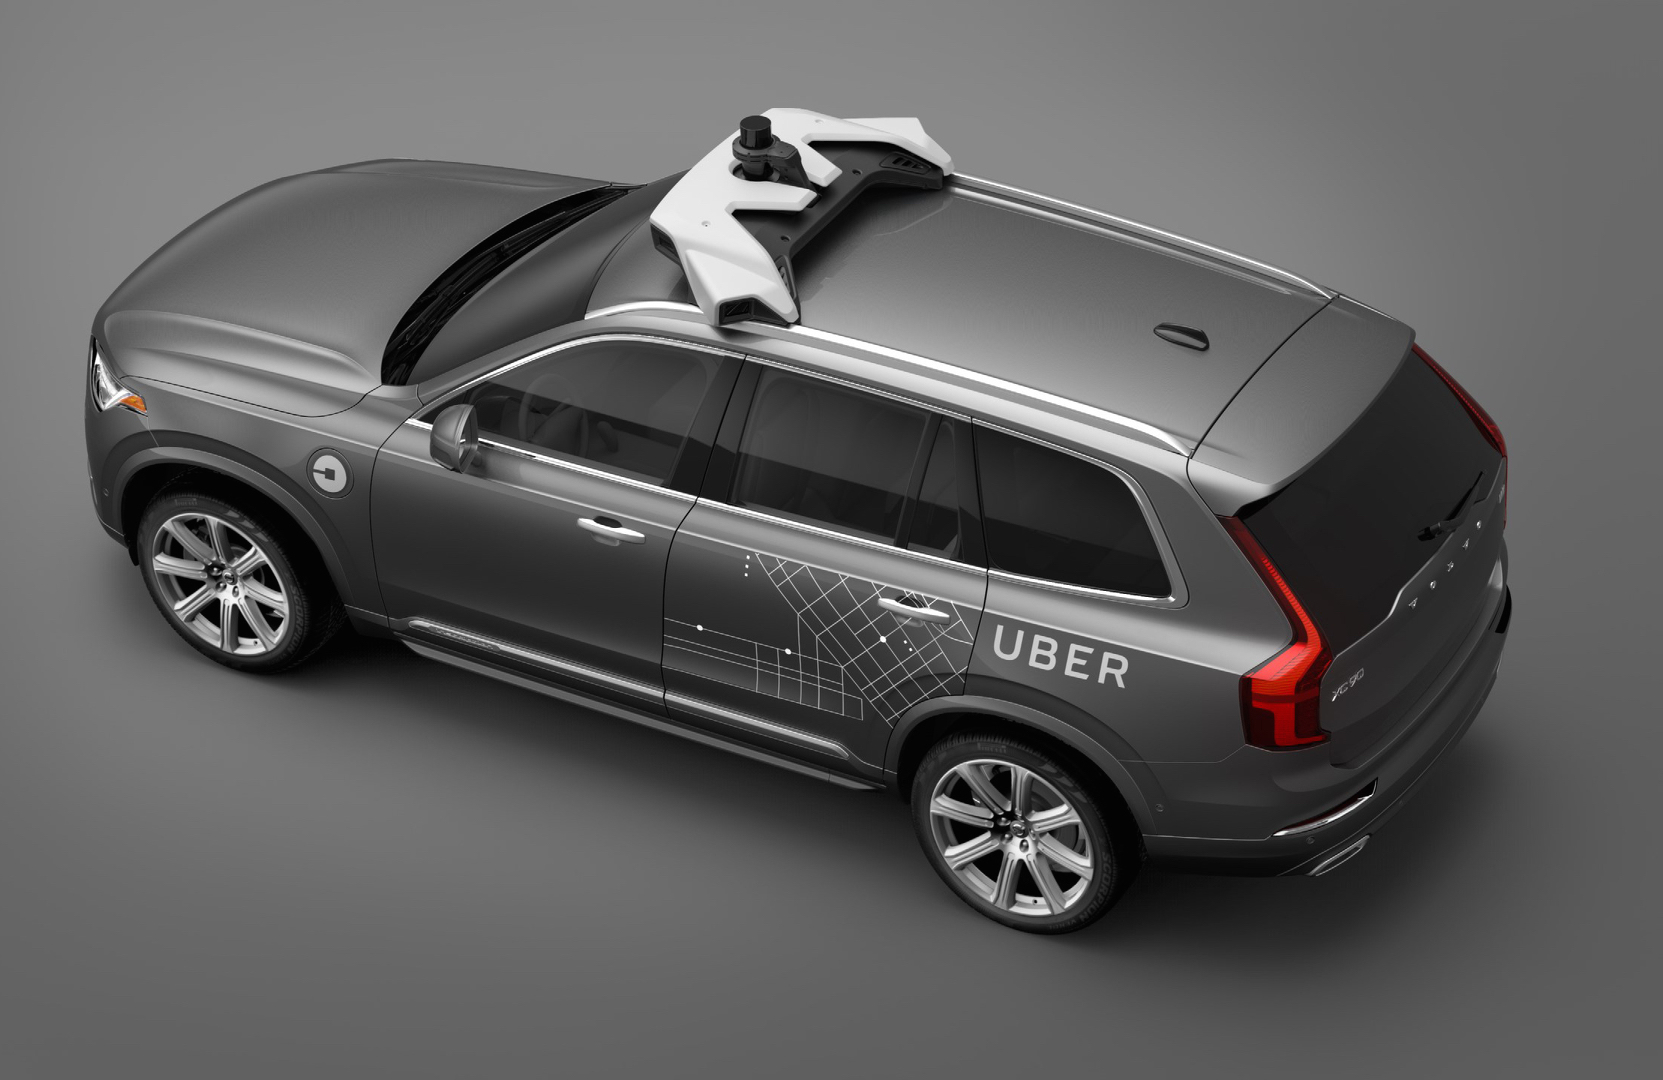 Volvo teams up with Uber to develop driverless cars